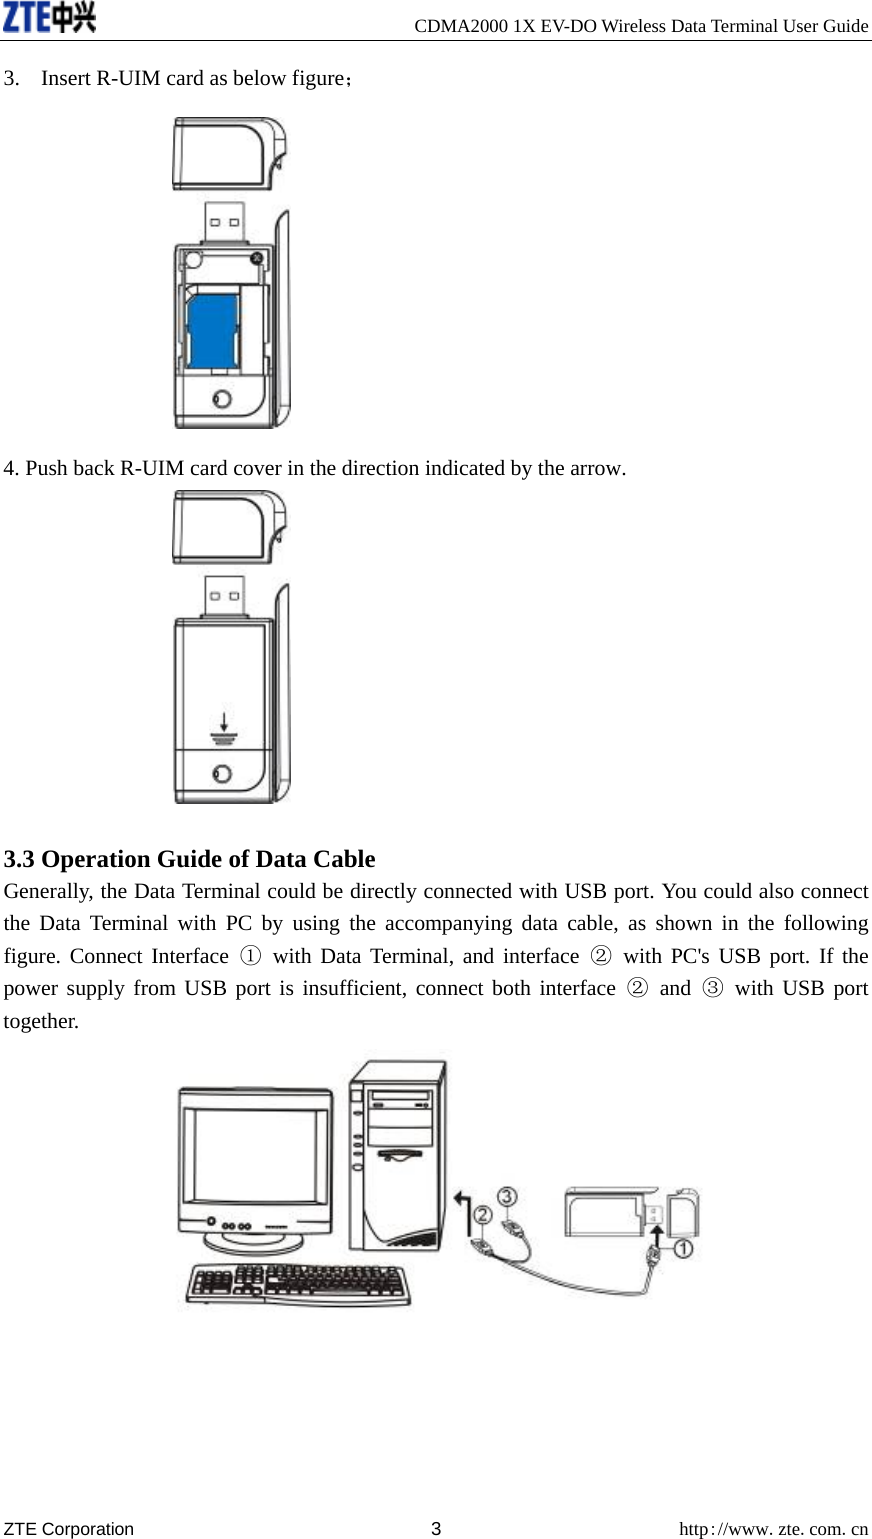     CDMA2000 1X EV-DO Wireless Data Terminal User Guide ZTE Corporation 3 http://www.zte.com.cn  3. Insert R-UIM card as below figure；  4. Push back R-UIM card cover in the direction indicated by the arrow.   3.3 Operation Guide of Data Cable Generally, the Data Terminal could be directly connected with USB port. You could also connect the Data Terminal with PC by using the accompanying data cable, as shown in the following figure. Connect Interface ① with Data Terminal, and interface ② with PC&apos;s USB port. If the power supply from USB port is insufficient, connect both interface ② and ③ with USB port together.   